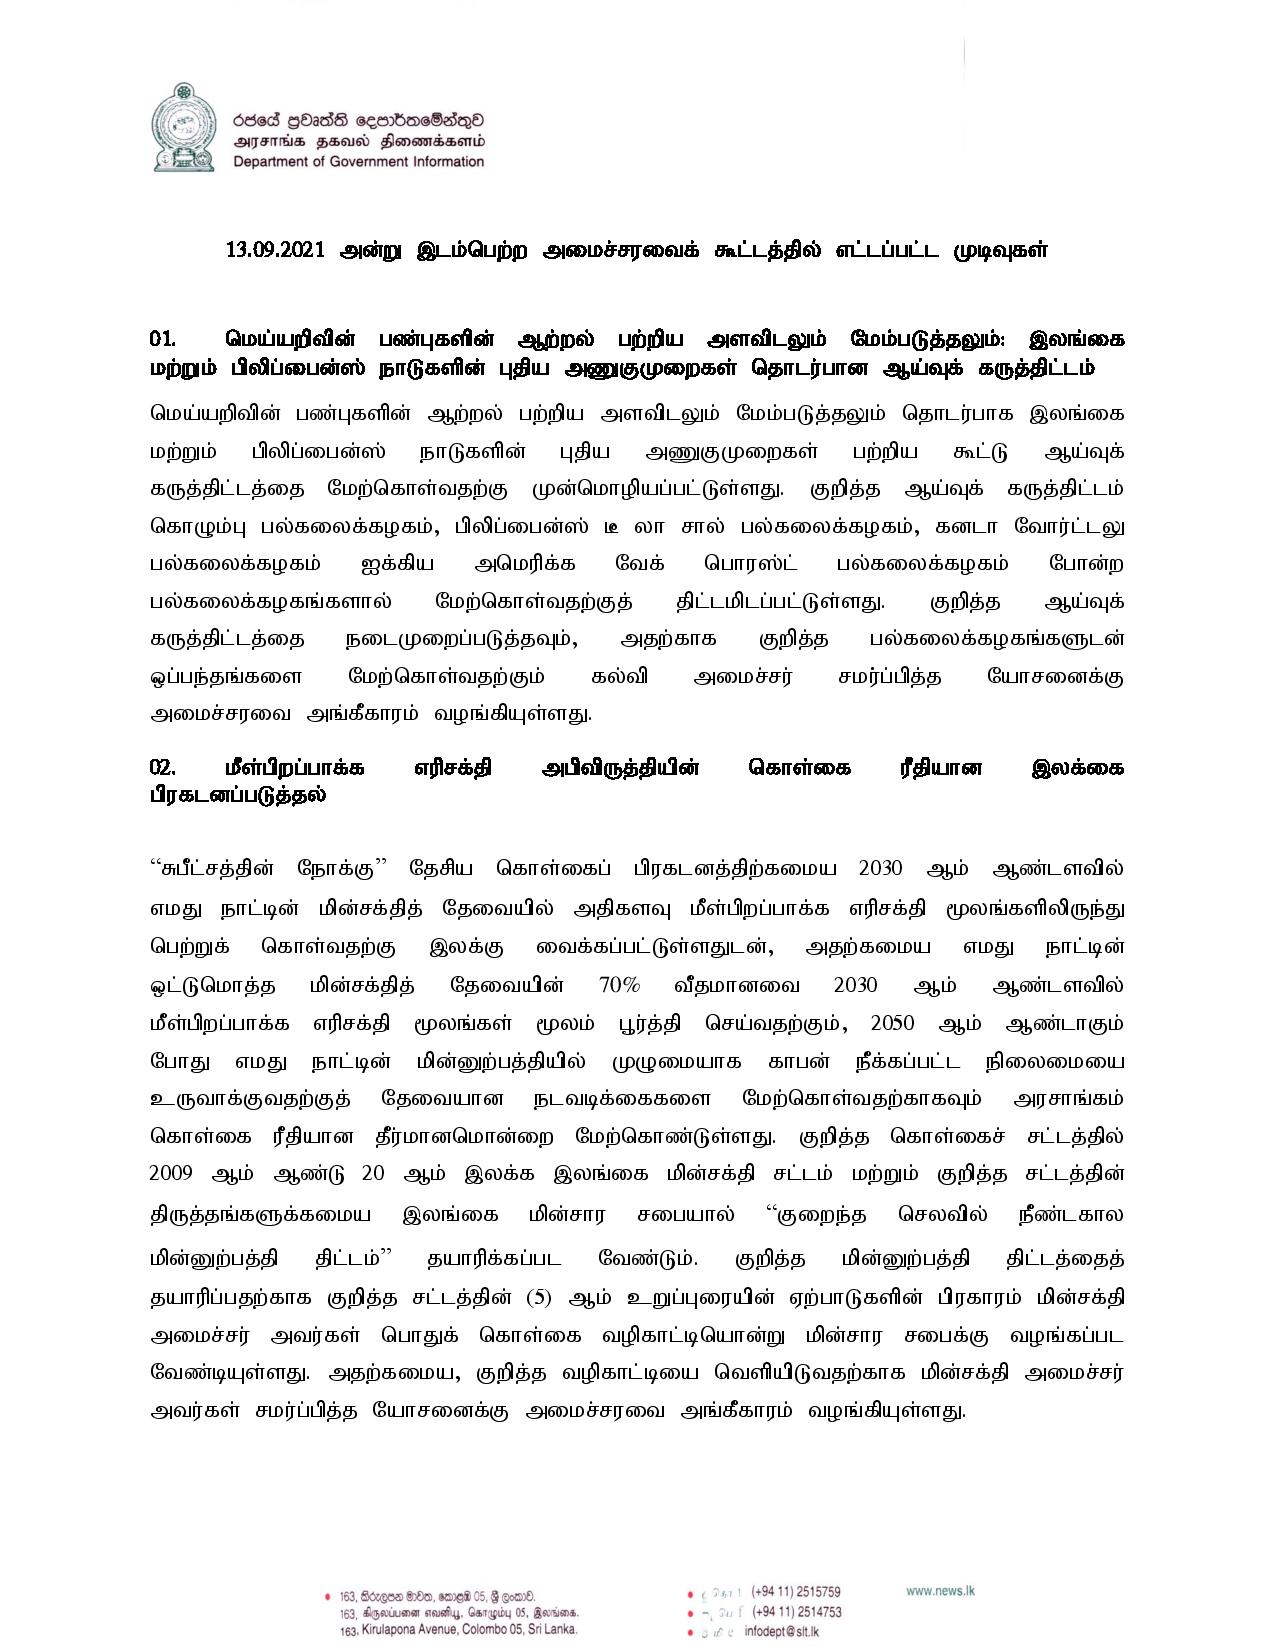 Cabinet Decision on 2021.09.13 Tamil page 001